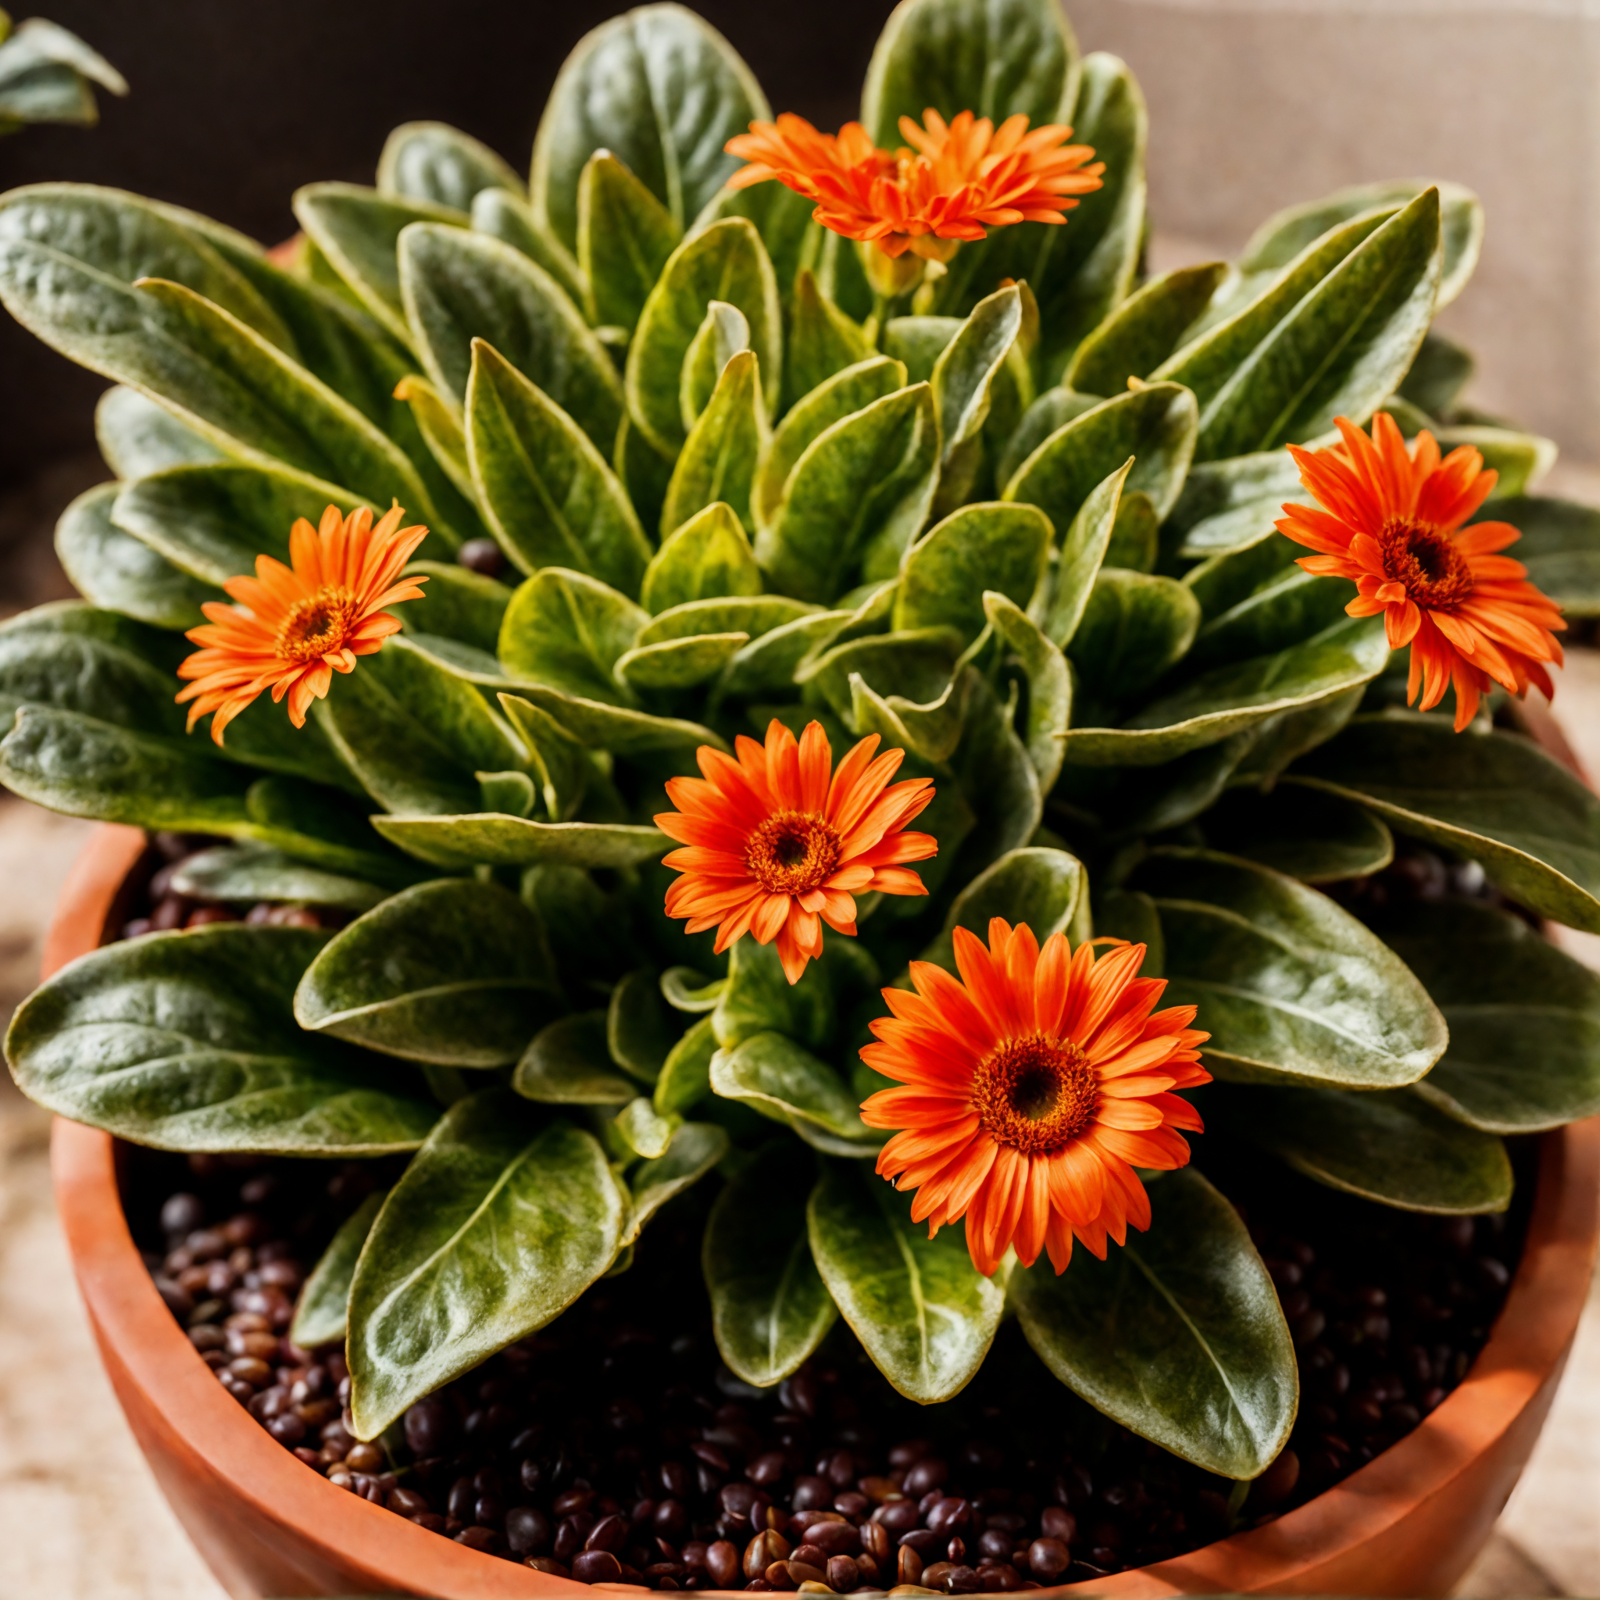 A vibrant Gerbera jamesonii with orange petals in a bowl, set against a dark background with clear lighting.